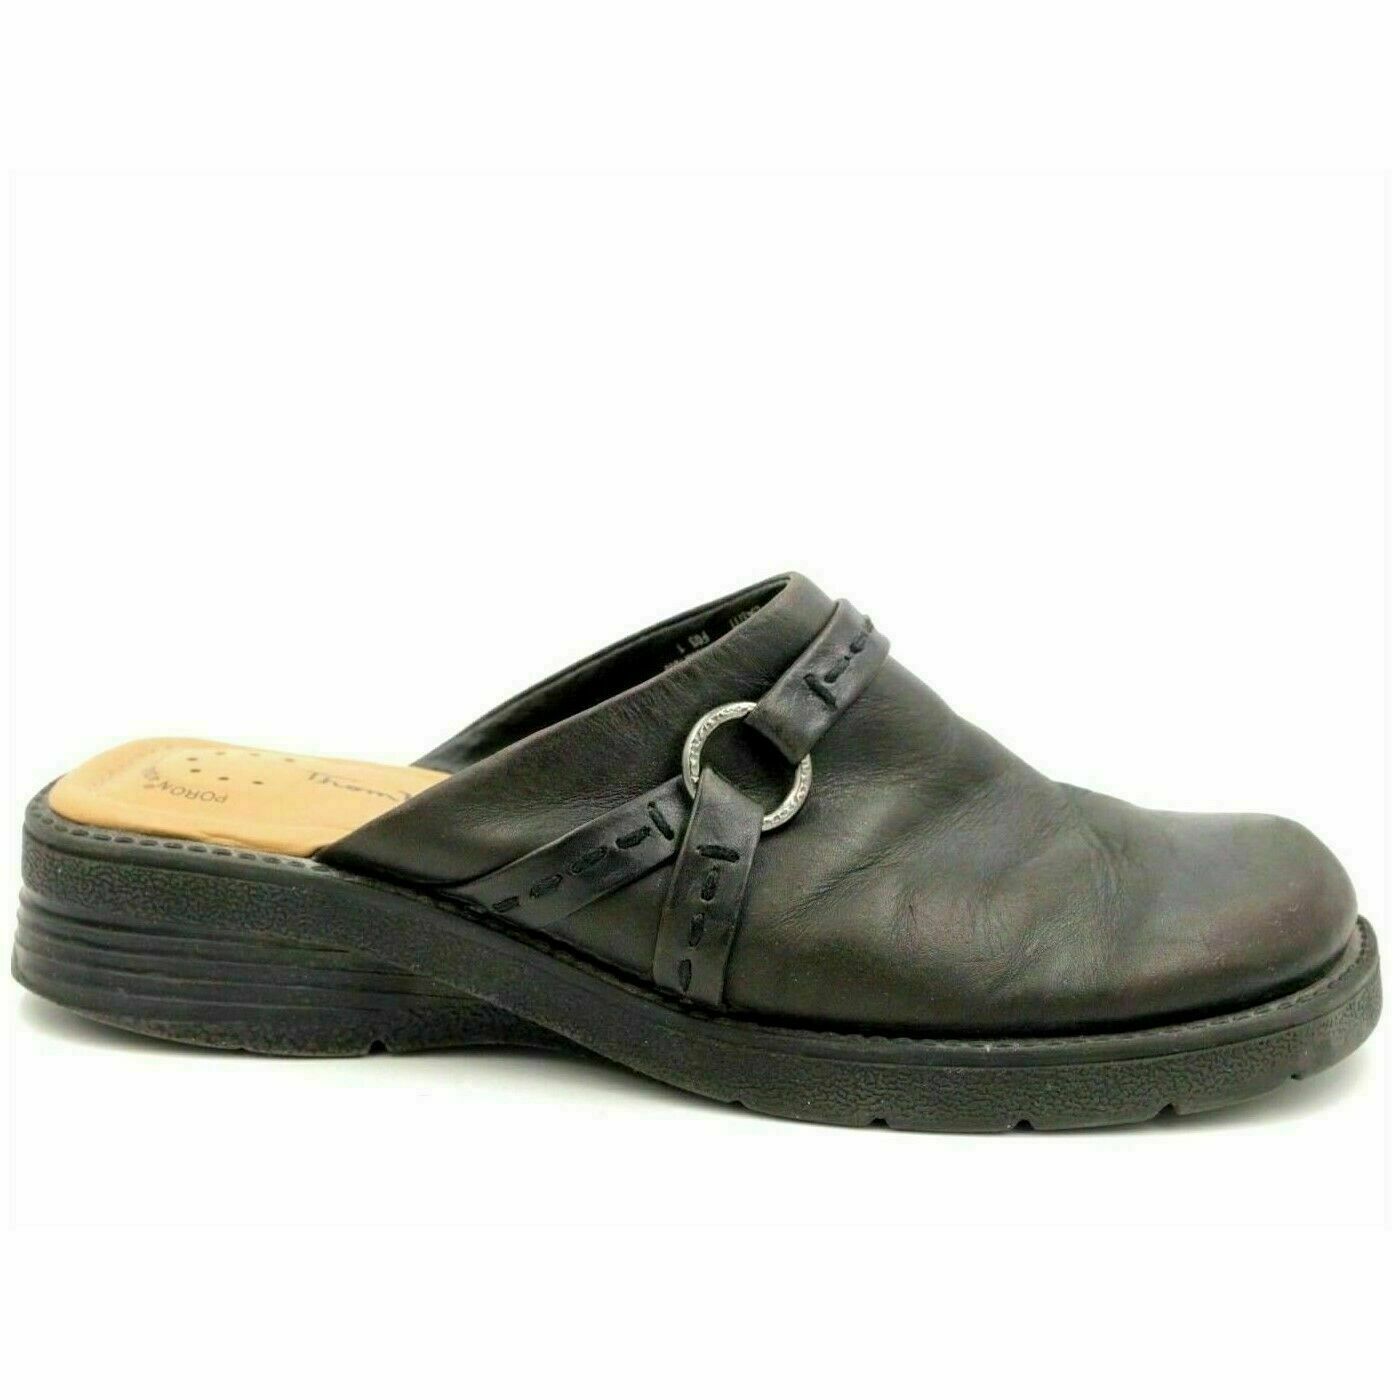 thom mcan shoes price